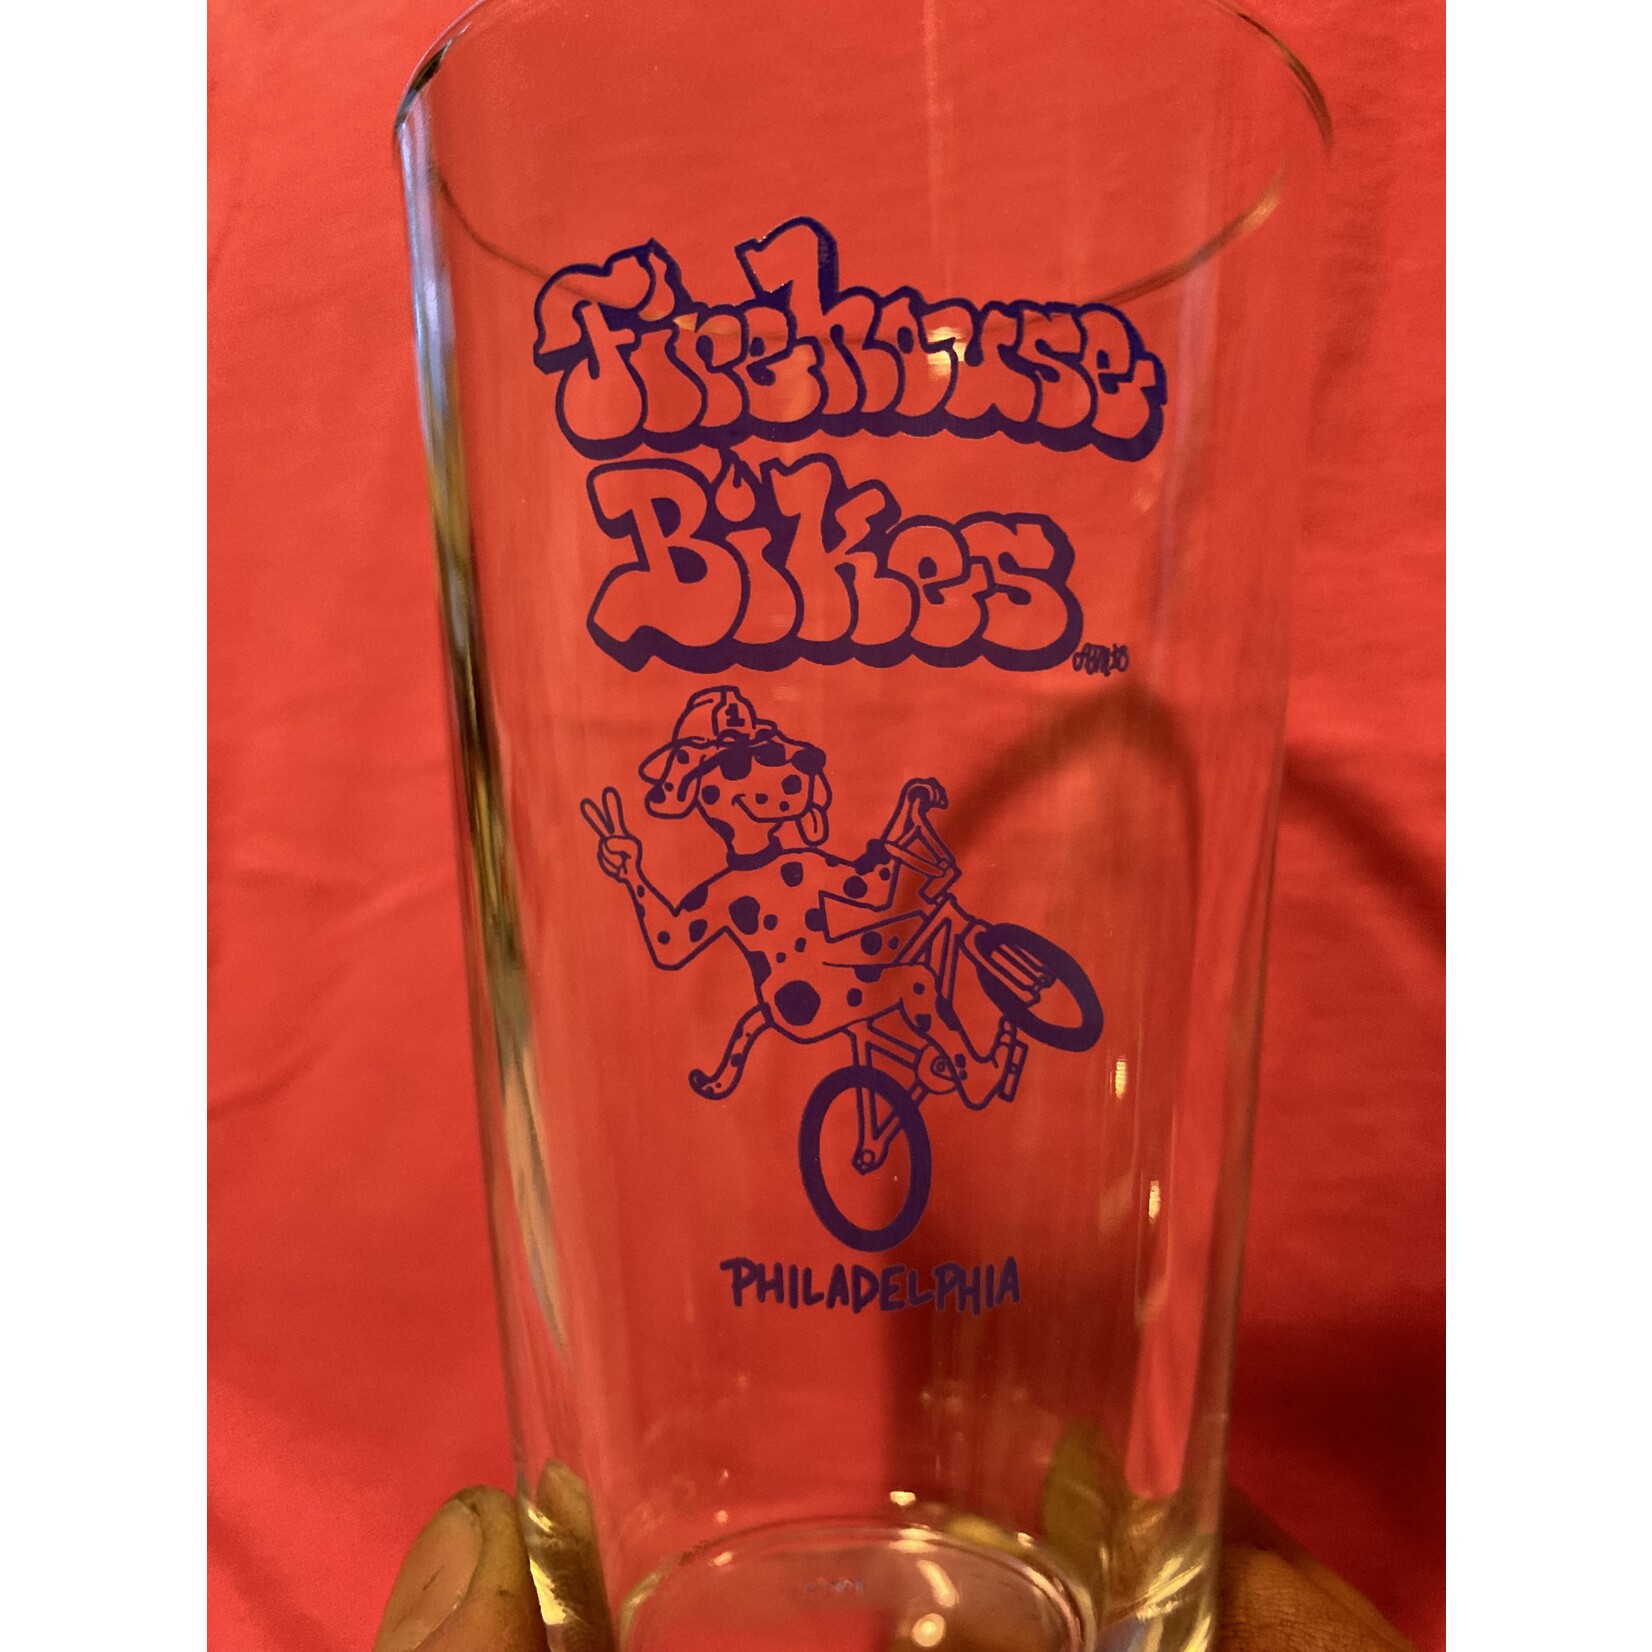 Firehouse Bicycles Wheelie Pup Pint Glass